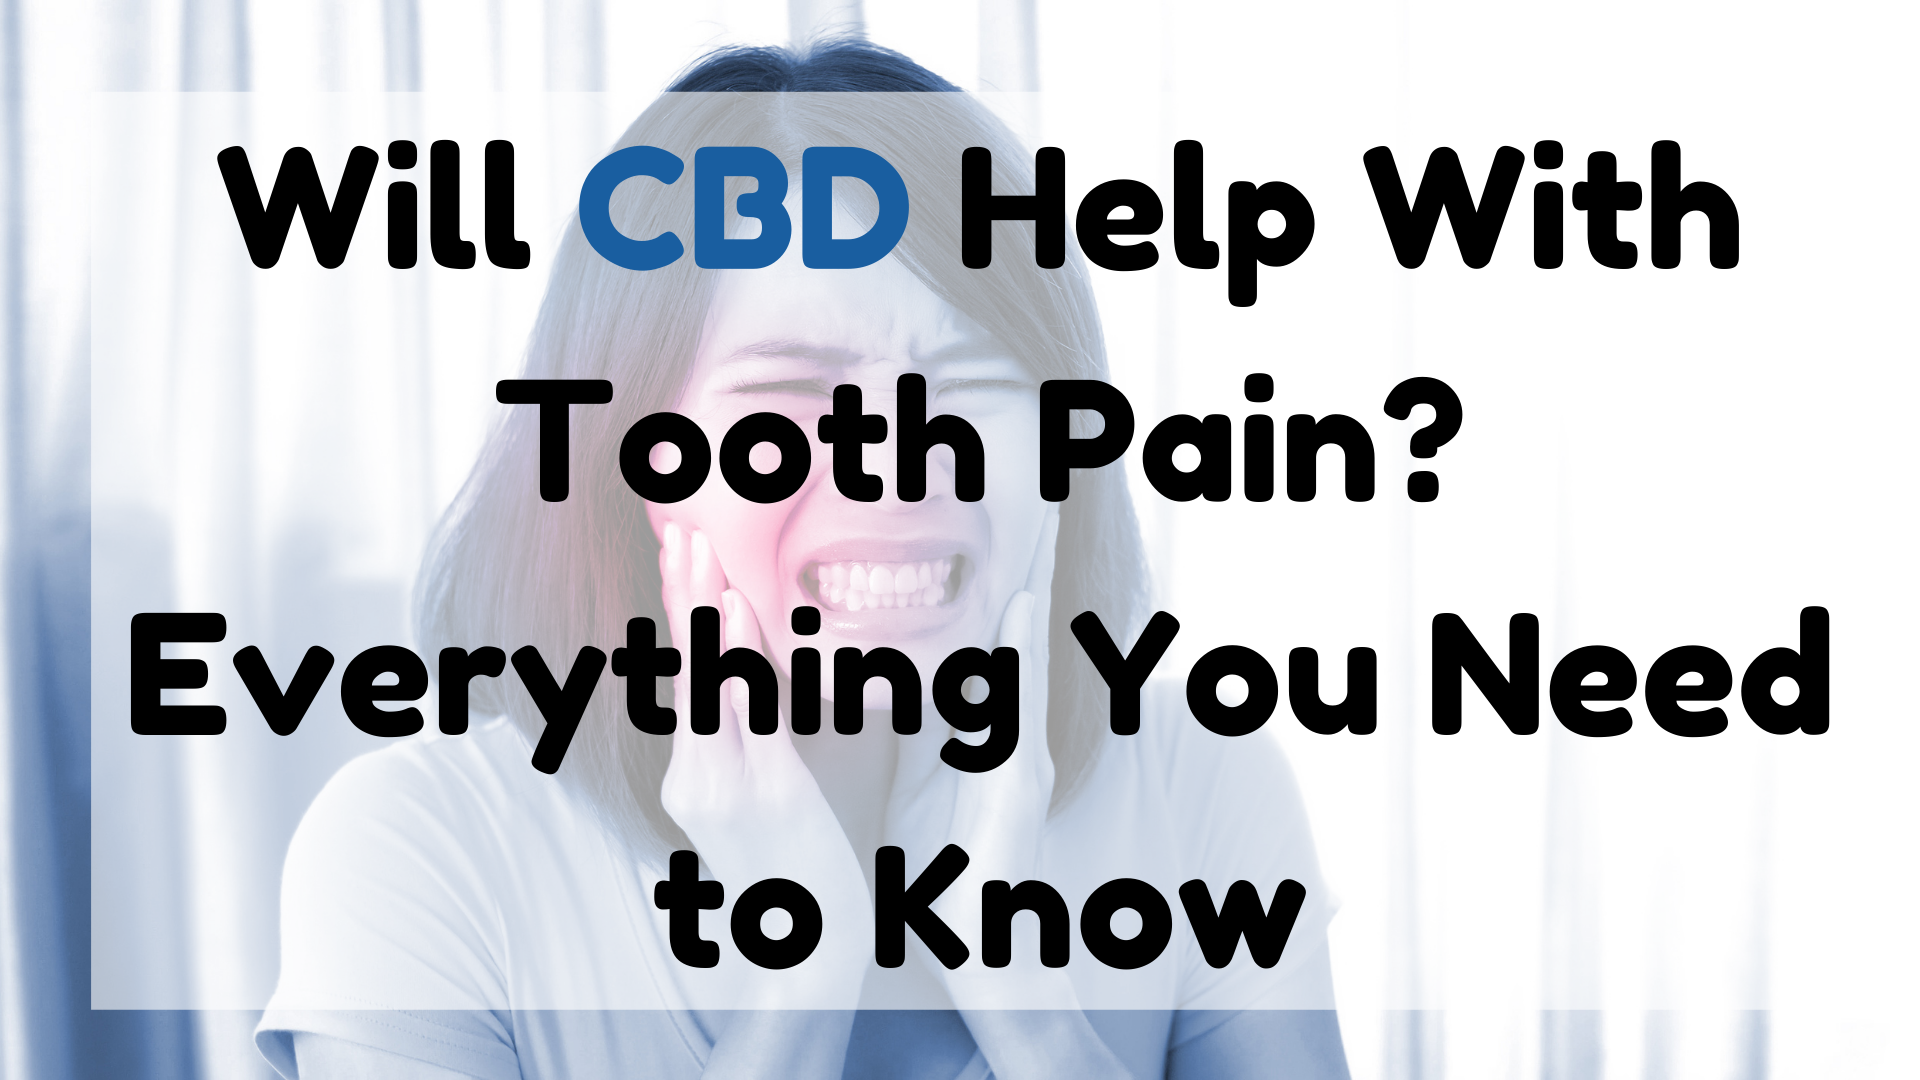 Will CBD Help with Tooth Pain